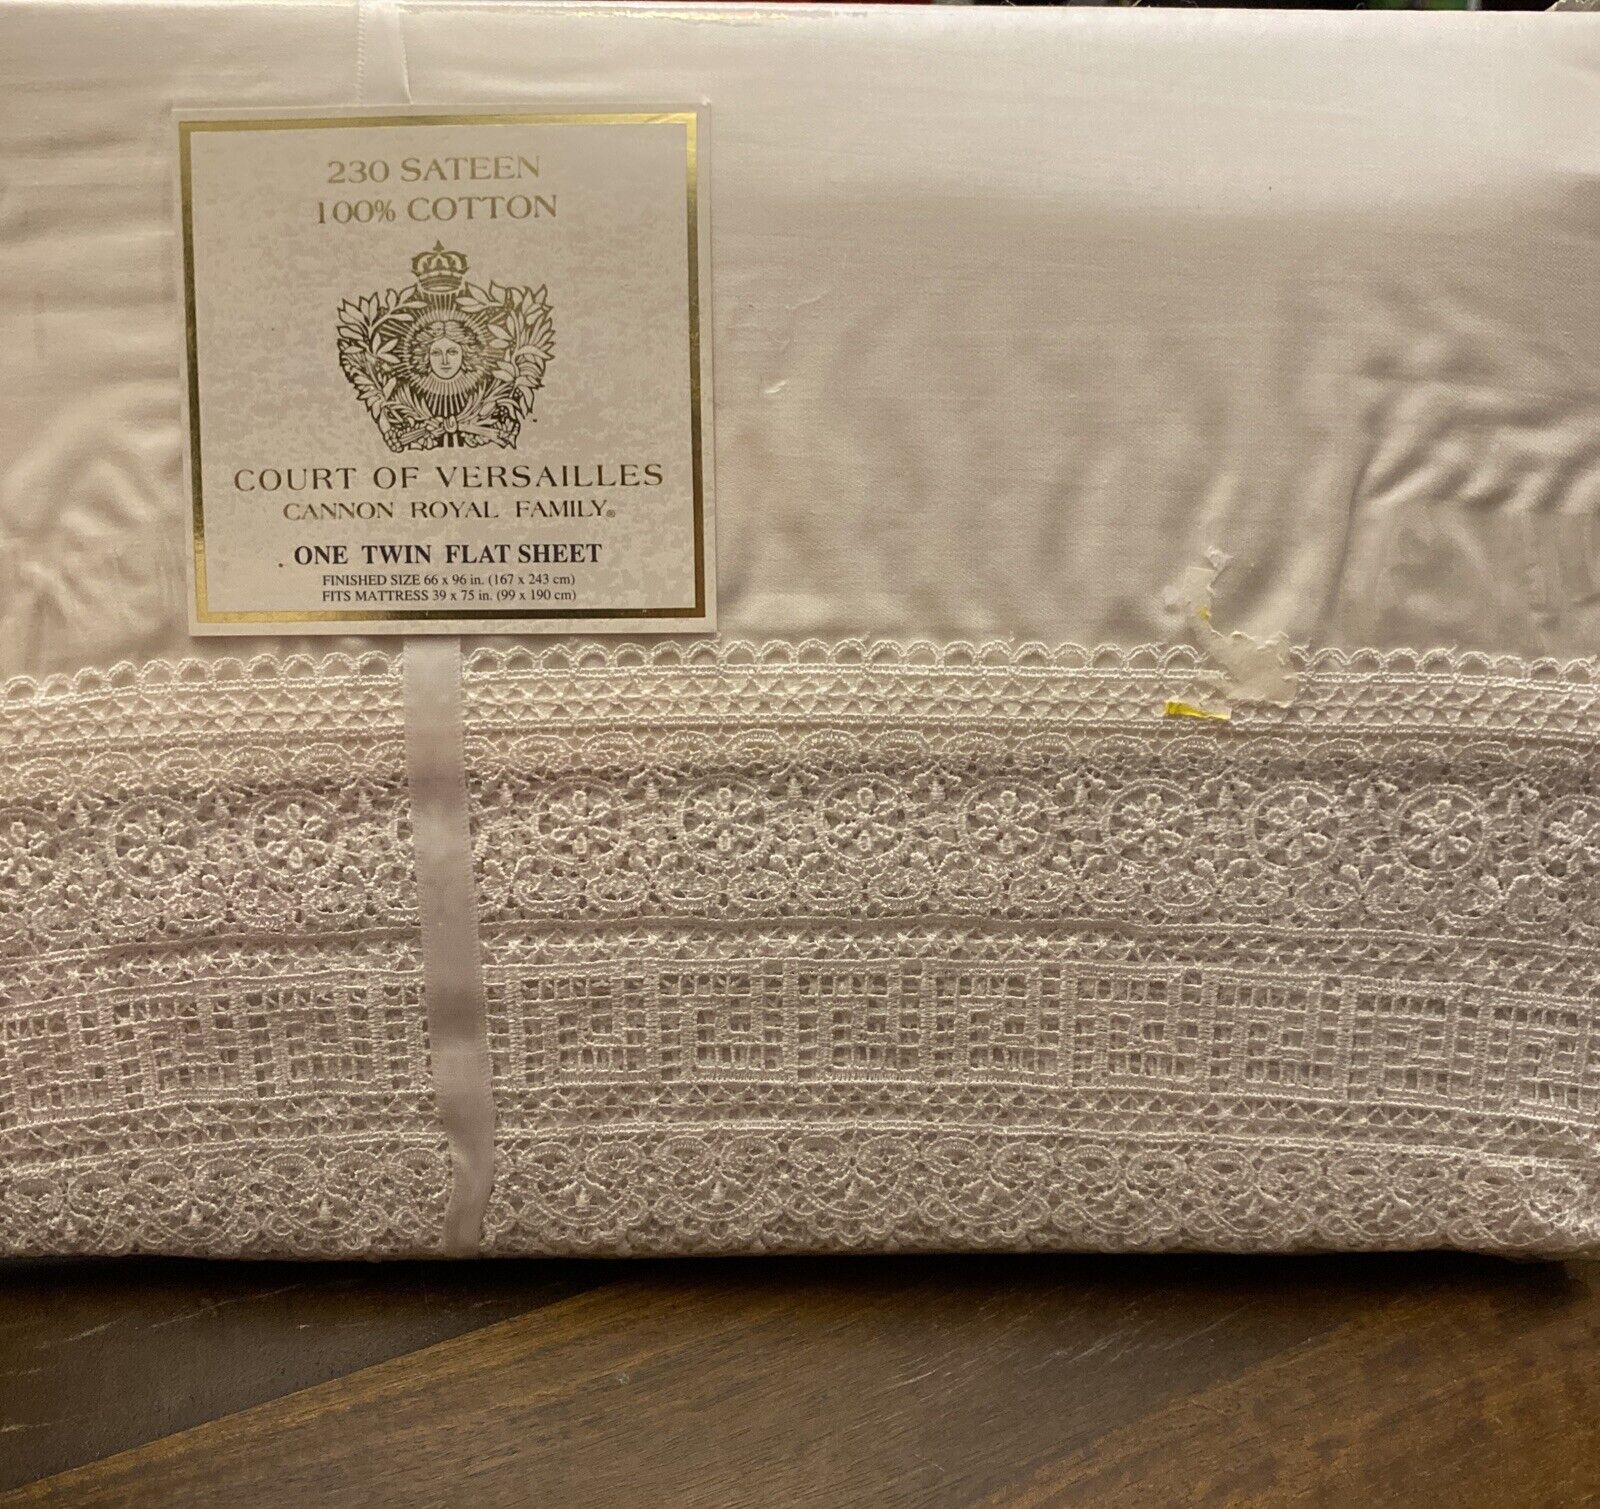 Cannon Royal Family Court Of Versailles Twin Flat Sheet Venise Lace White NEW